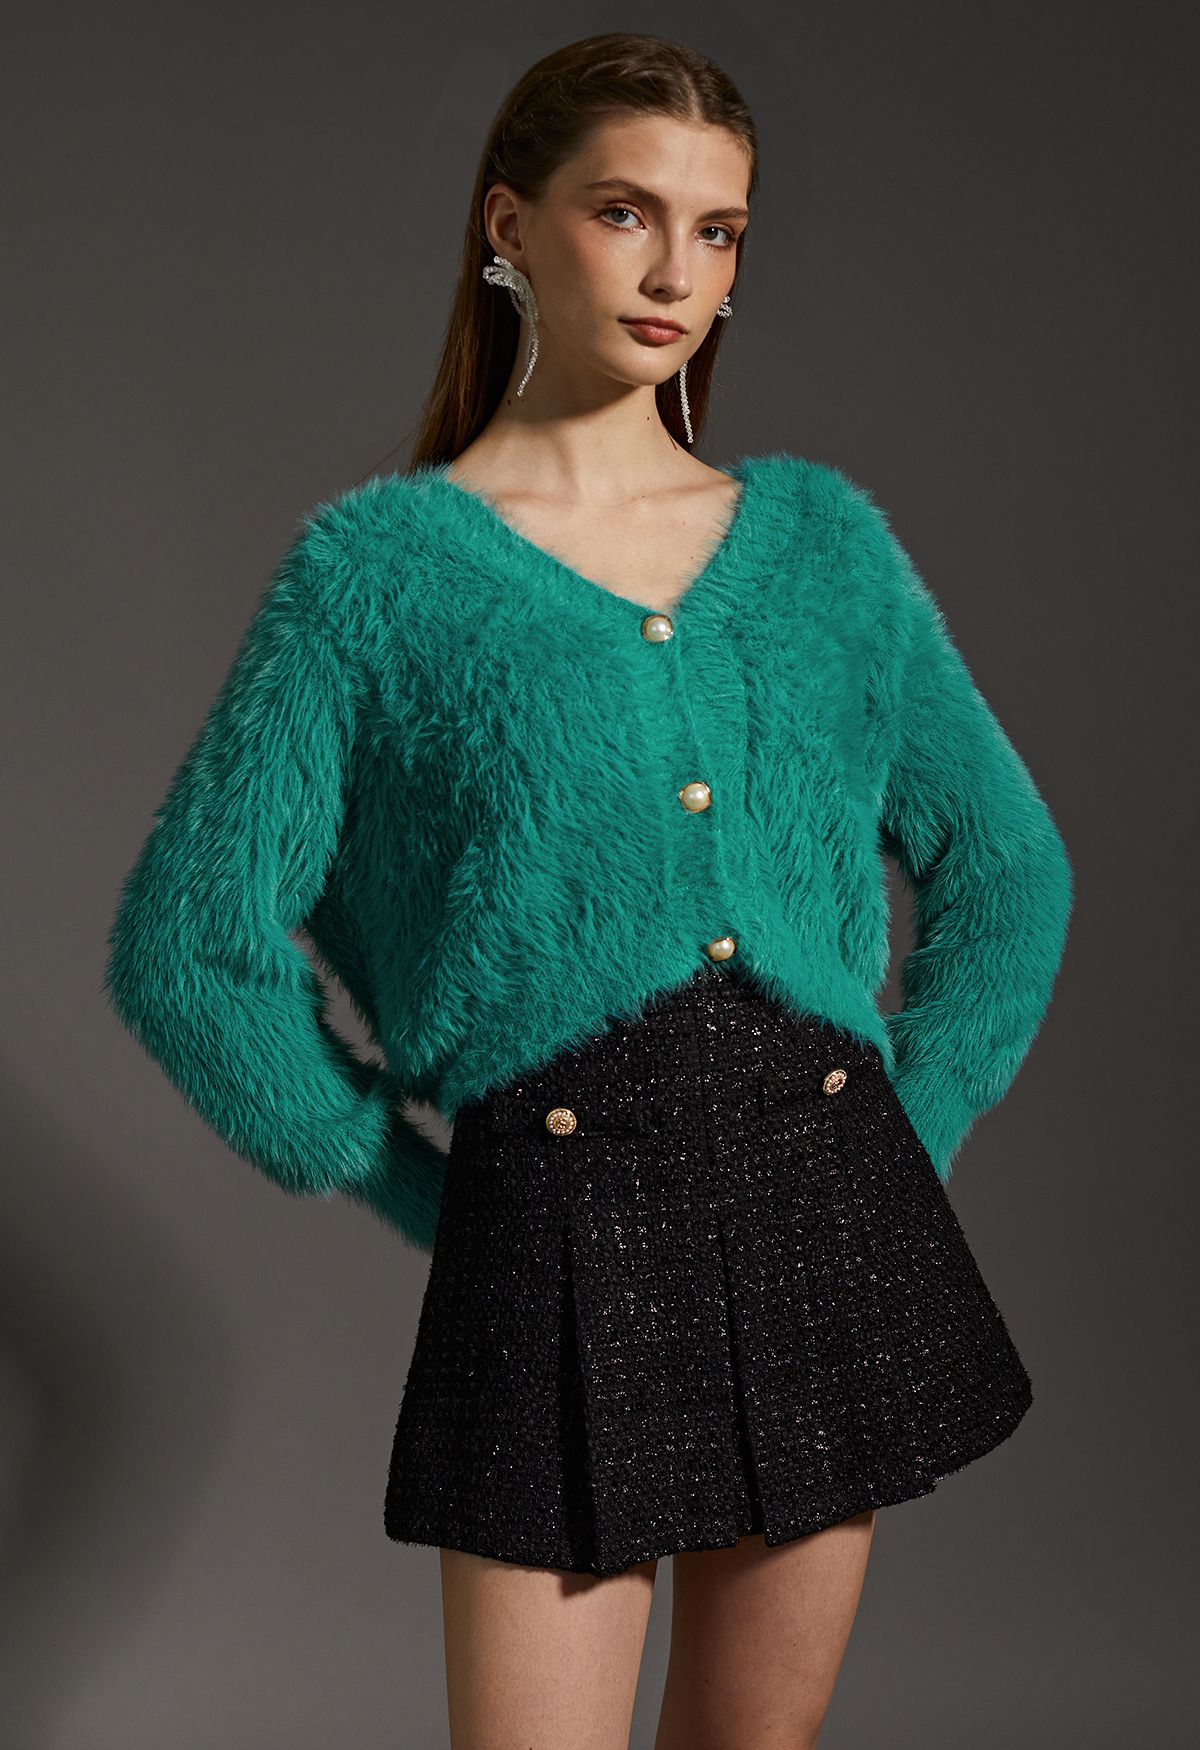 Ensemble Fuzzy Cami Top et Pearly Buttoned Cardigan en Turquoise